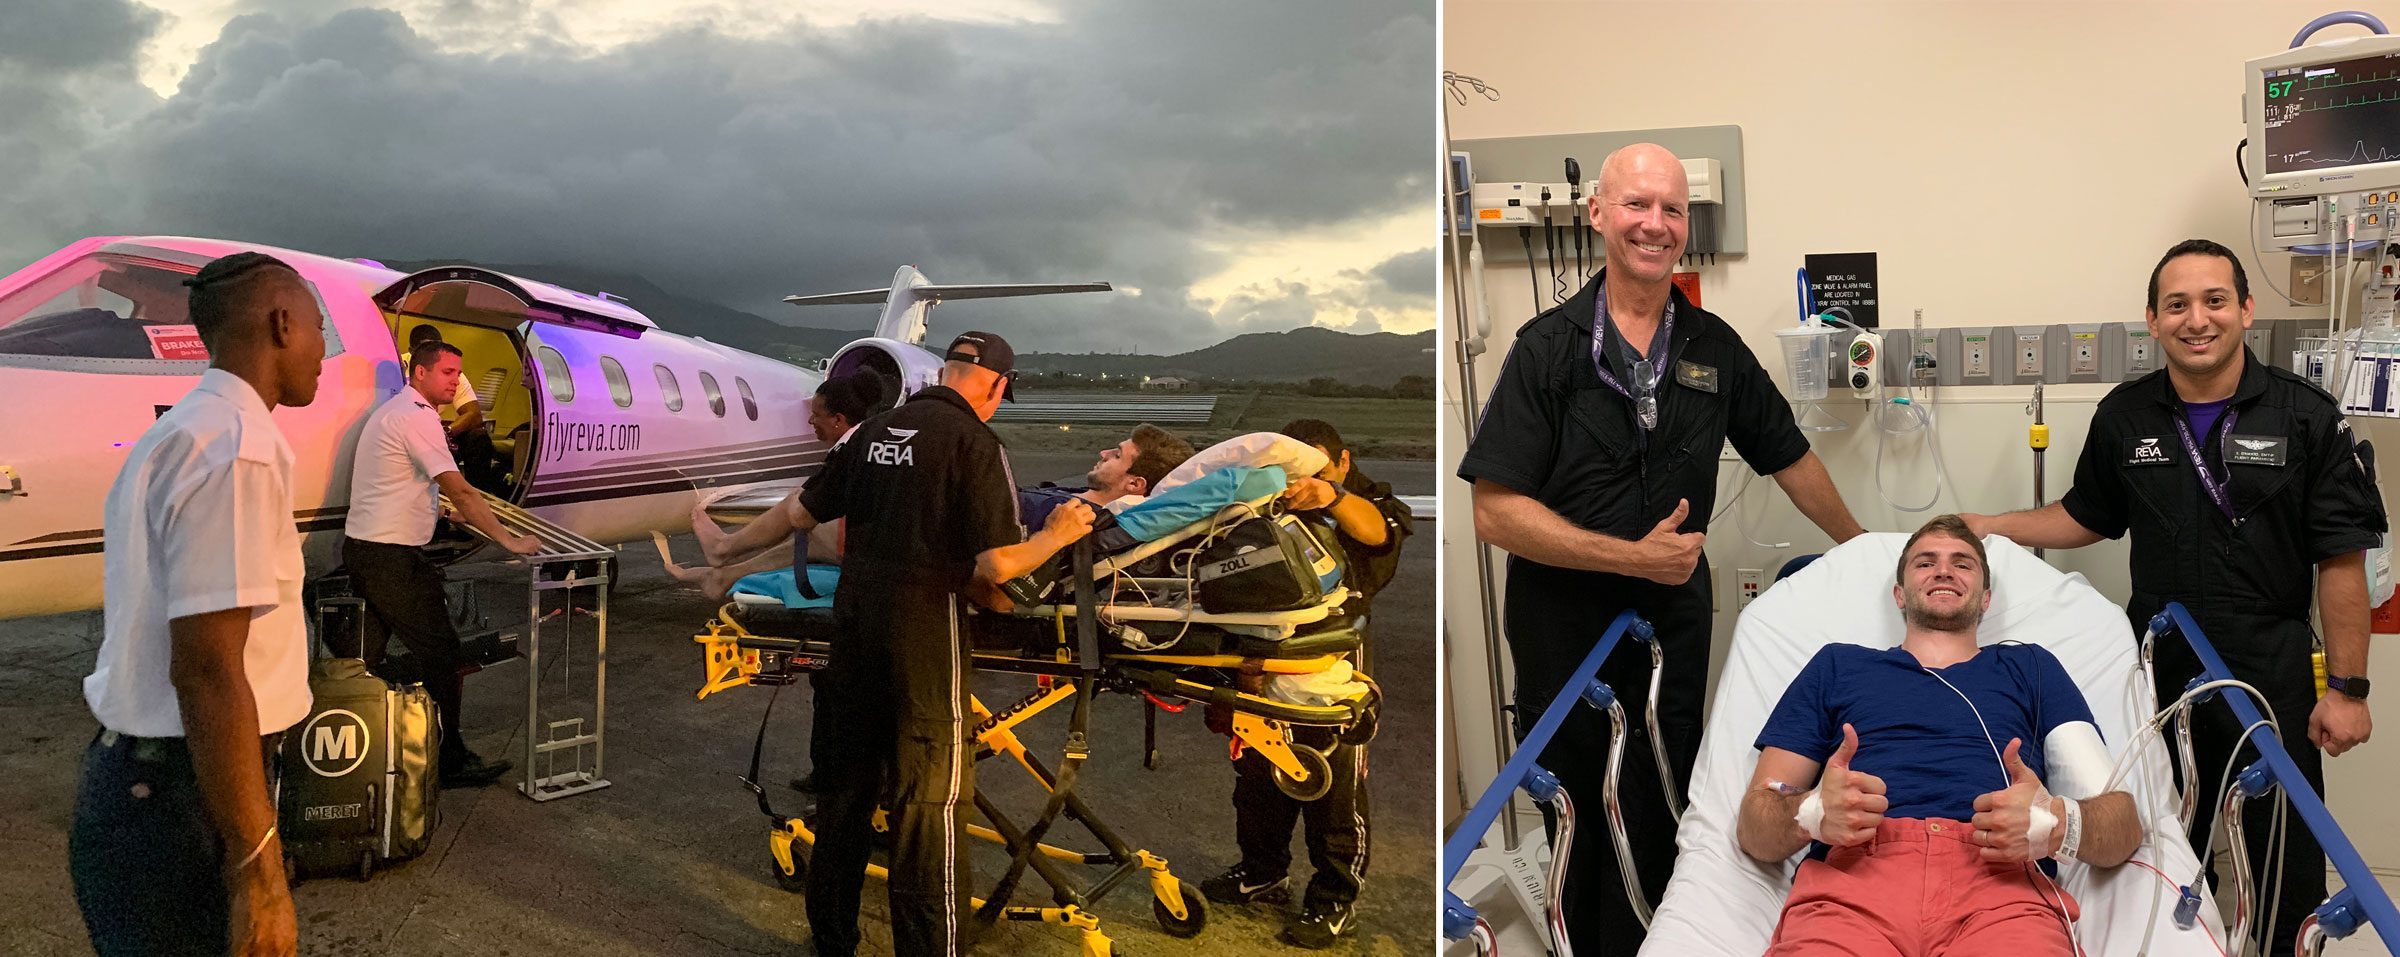 left: Clay being loaded into the medevac plane; right: Clay with the medevac EMTs in the ER in Florida